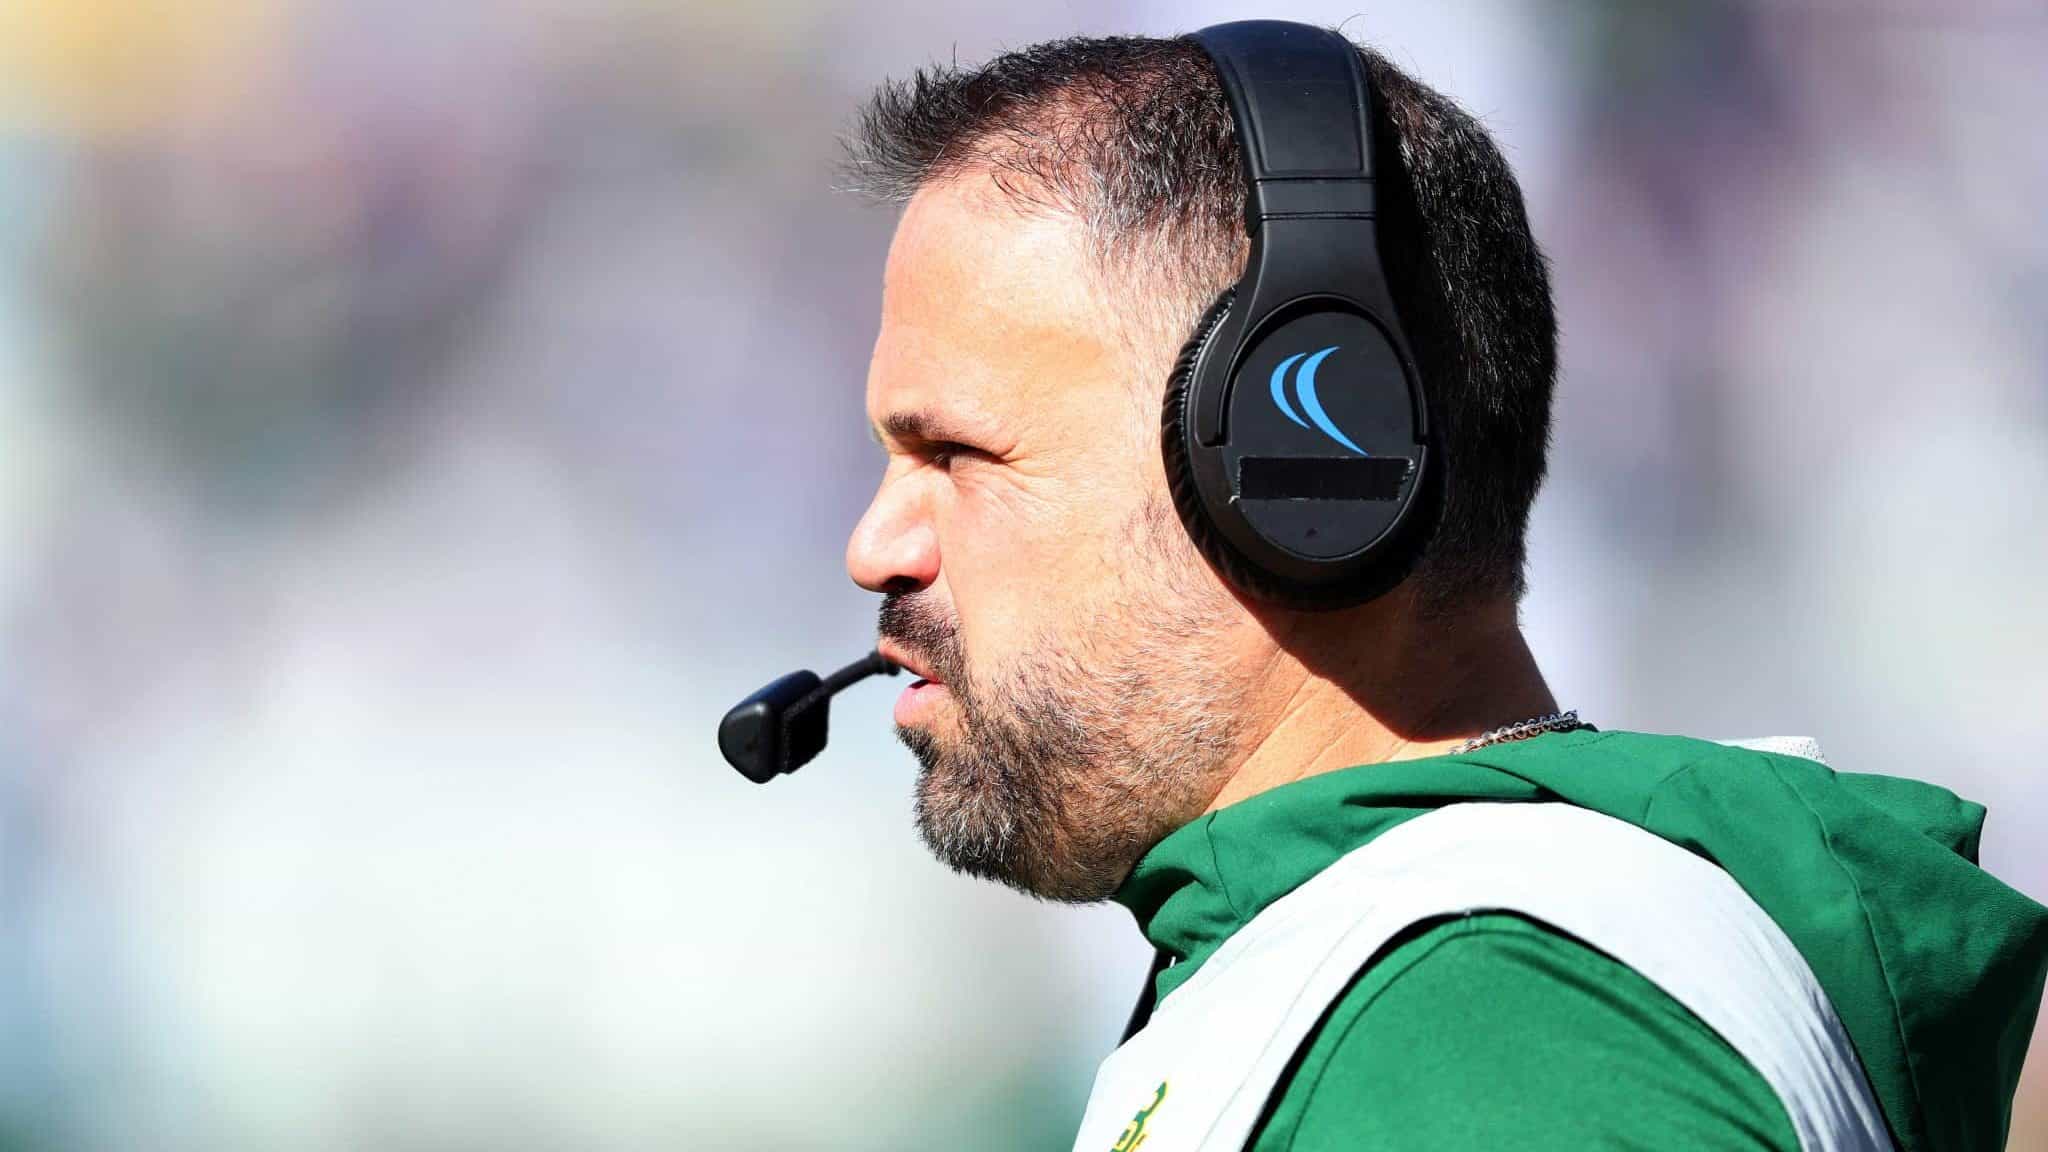 FORT WORTH, TEXAS - NOVEMBER 09: Head coach Matt Rhule of the Baylor Bears leads the Bears against the TCU Horned Frogs in the first quarter at Amon G. Carter Stadium on November 09, 2019 in Fort Worth, Texas.